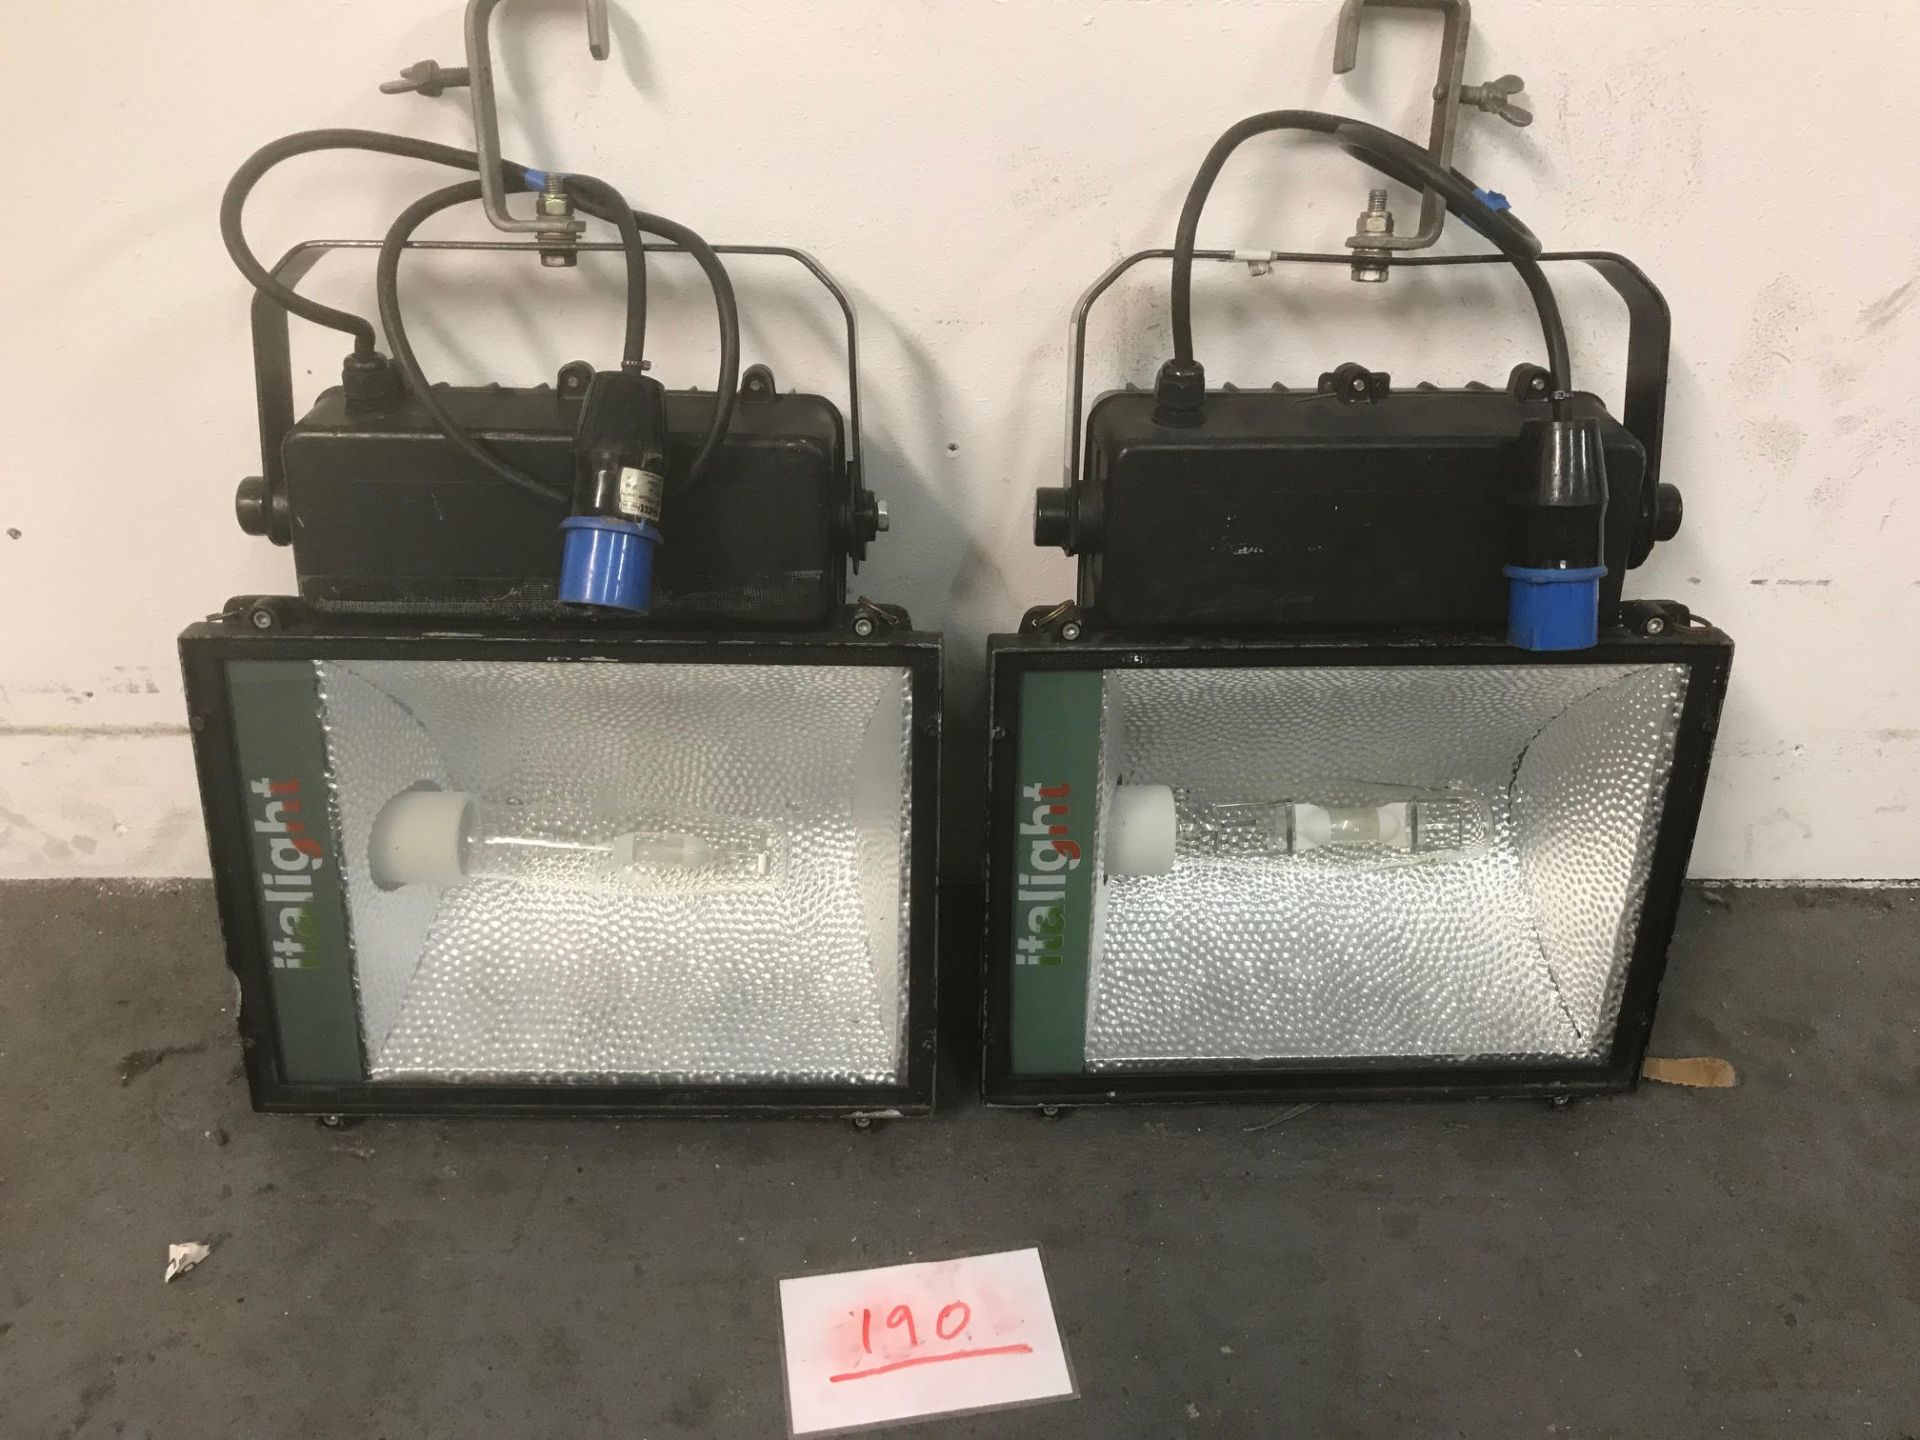 2x 400w HTI floods with hook clamp